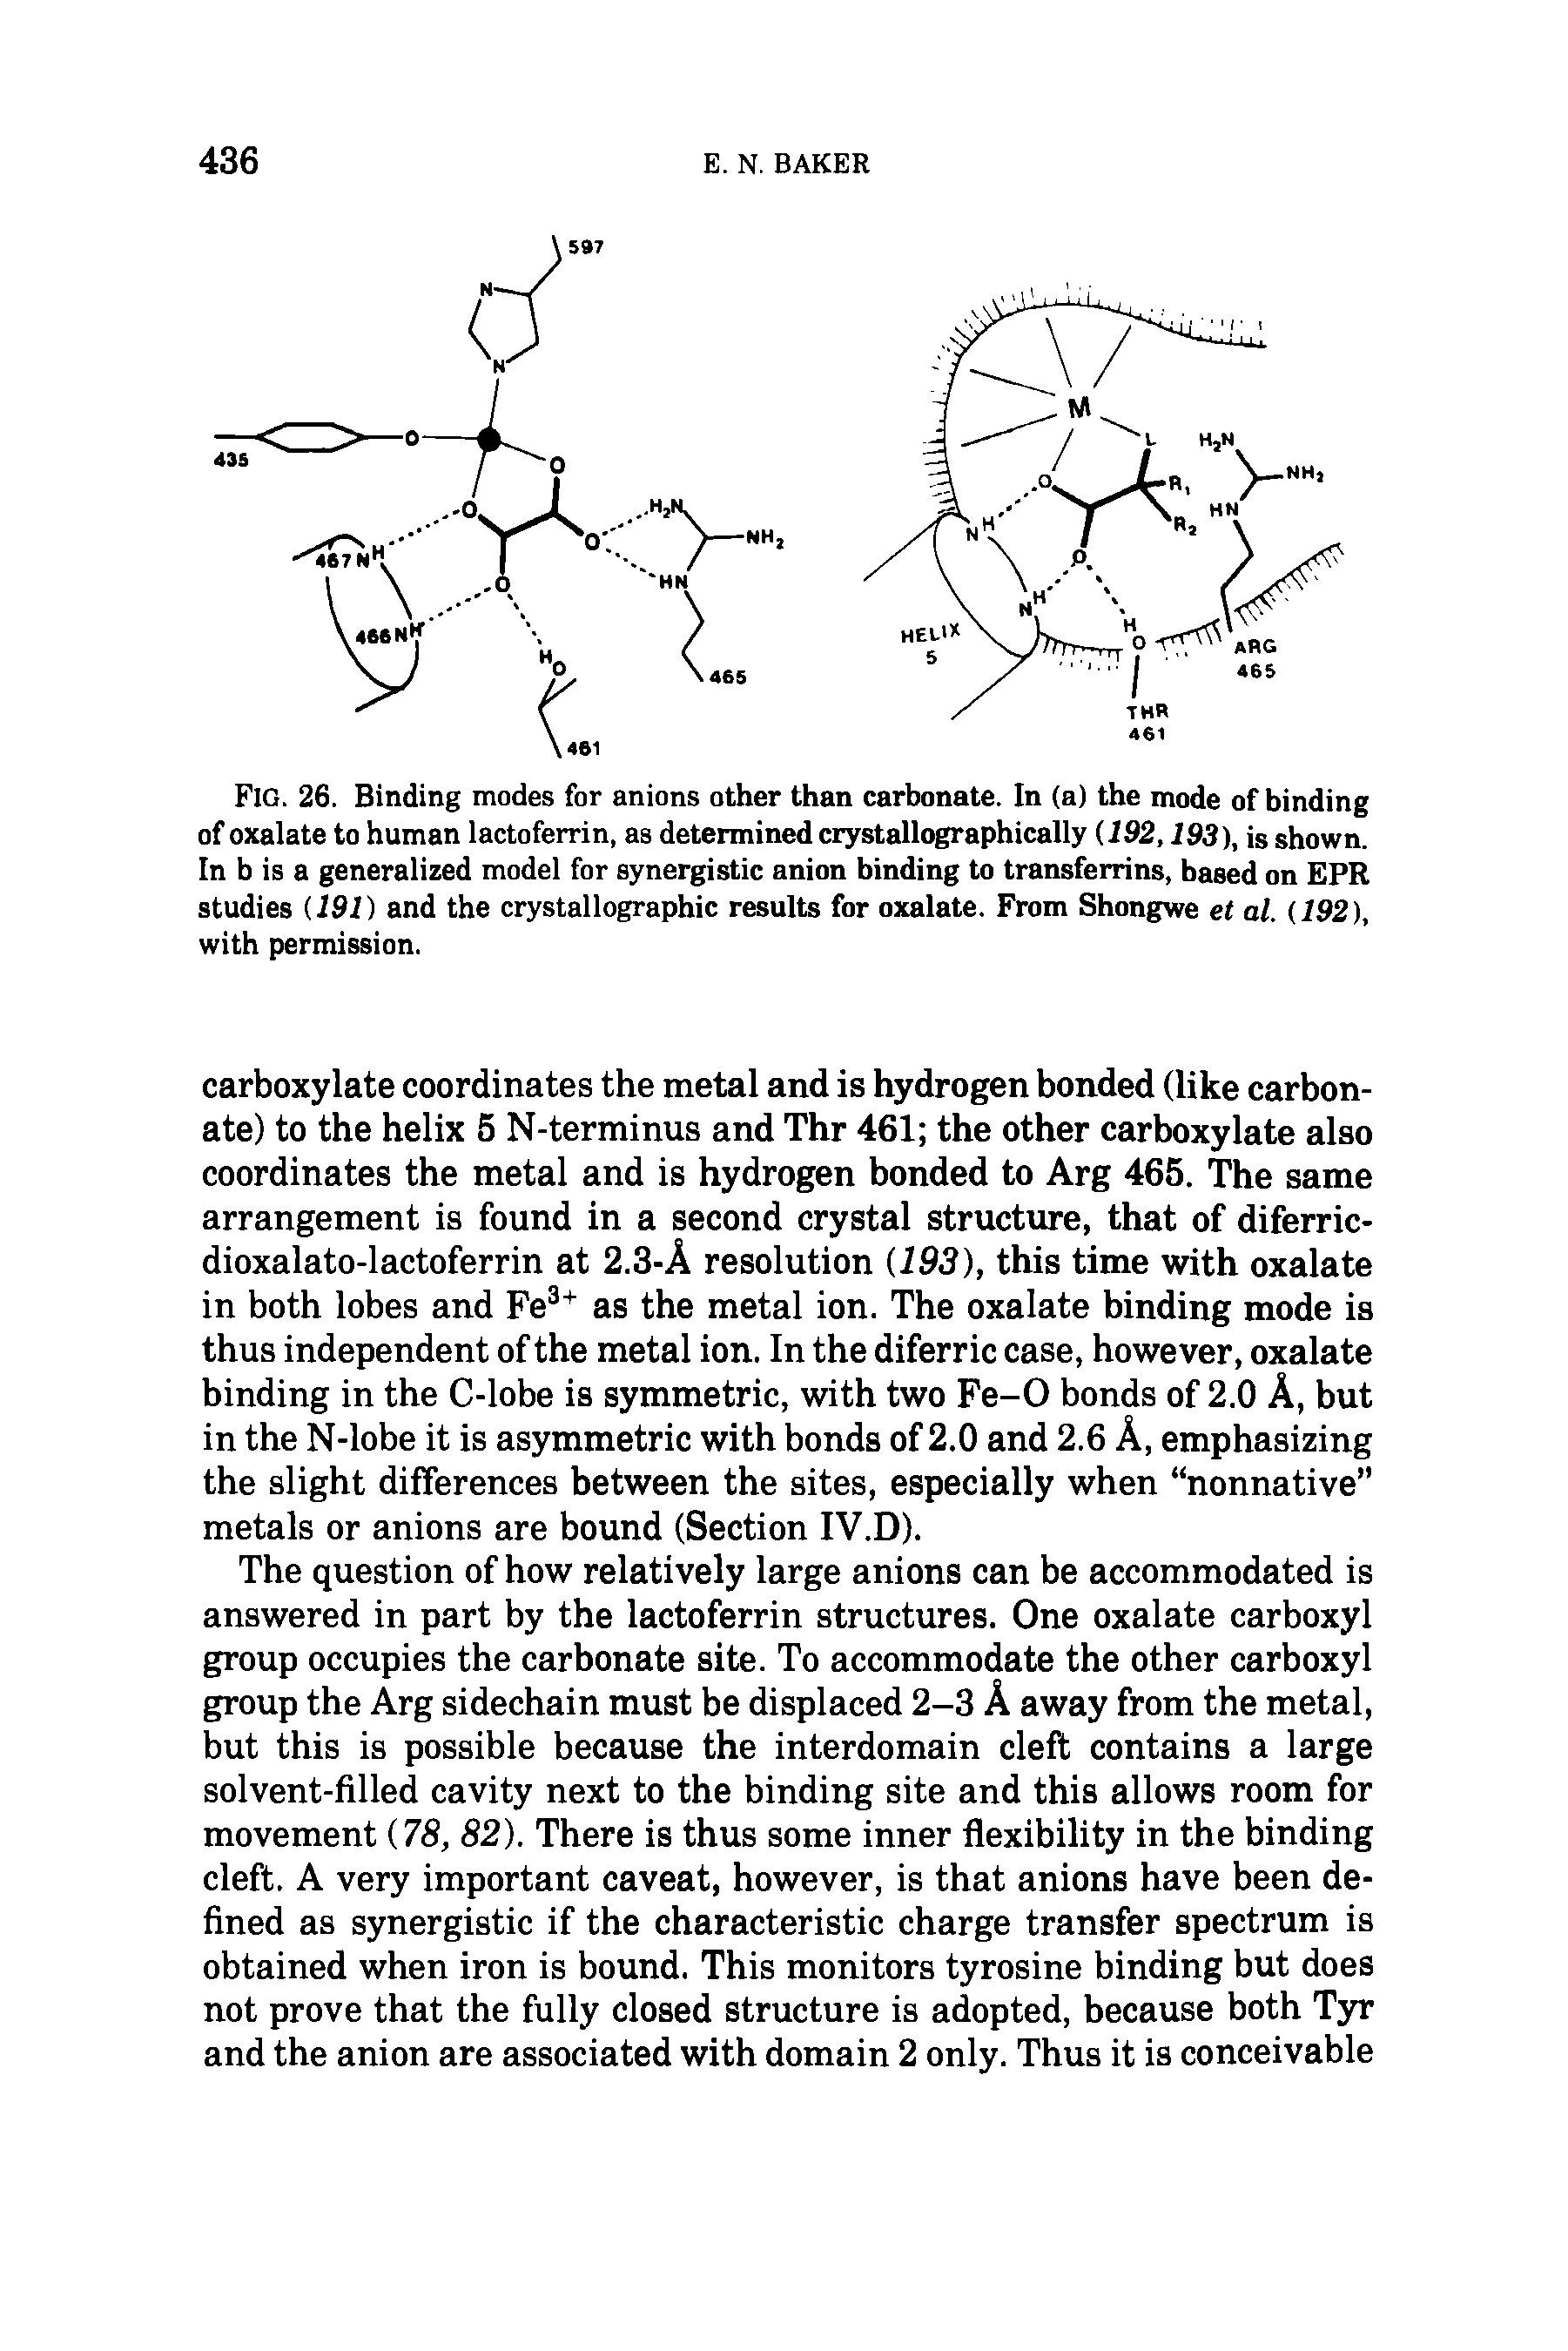 Fig. 26. Binding modes for anions other than carbonate. In (a) the mode of binding of oxalate to human lactoferrin, as determined crystallographically (192,193), is shown. In b is a generalized model for synergistic anion binding to transferrins, based on EPR studies (191) and the crystallographic results for oxalate. From Shongwe et al. (192), with permission.